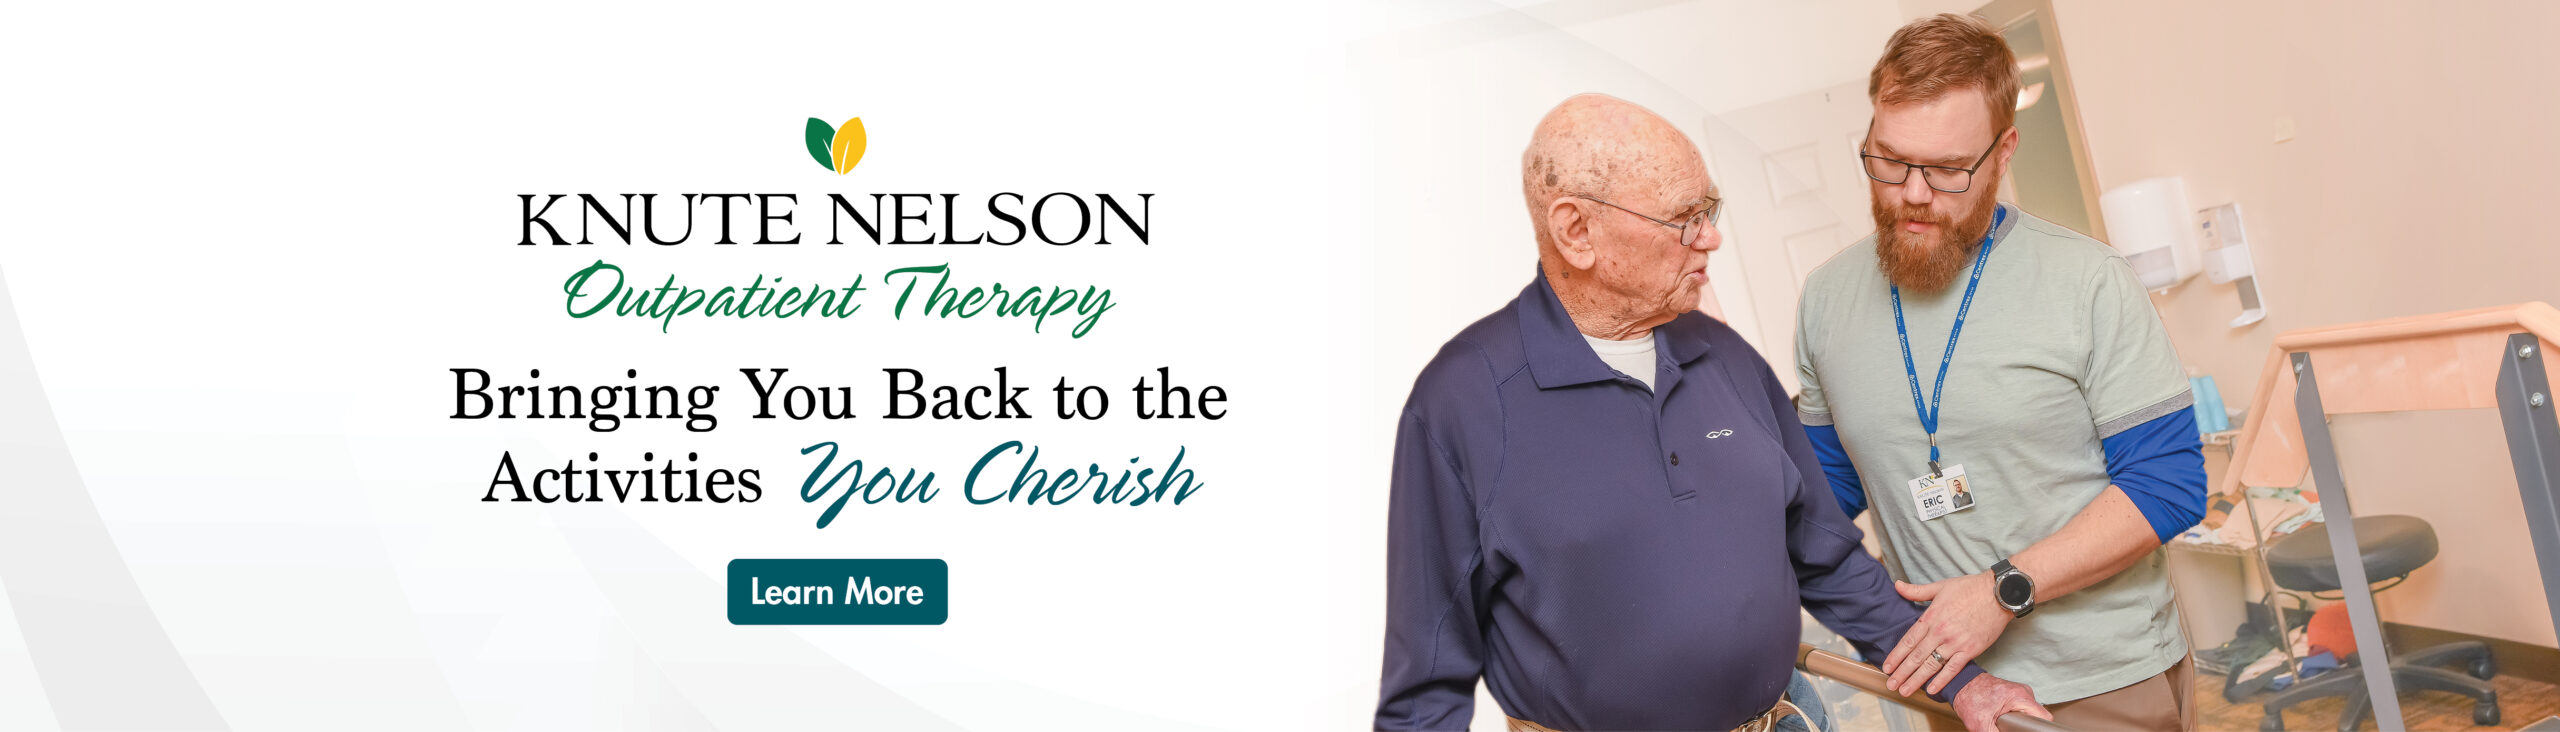 Outpatient Therapy Web Banner